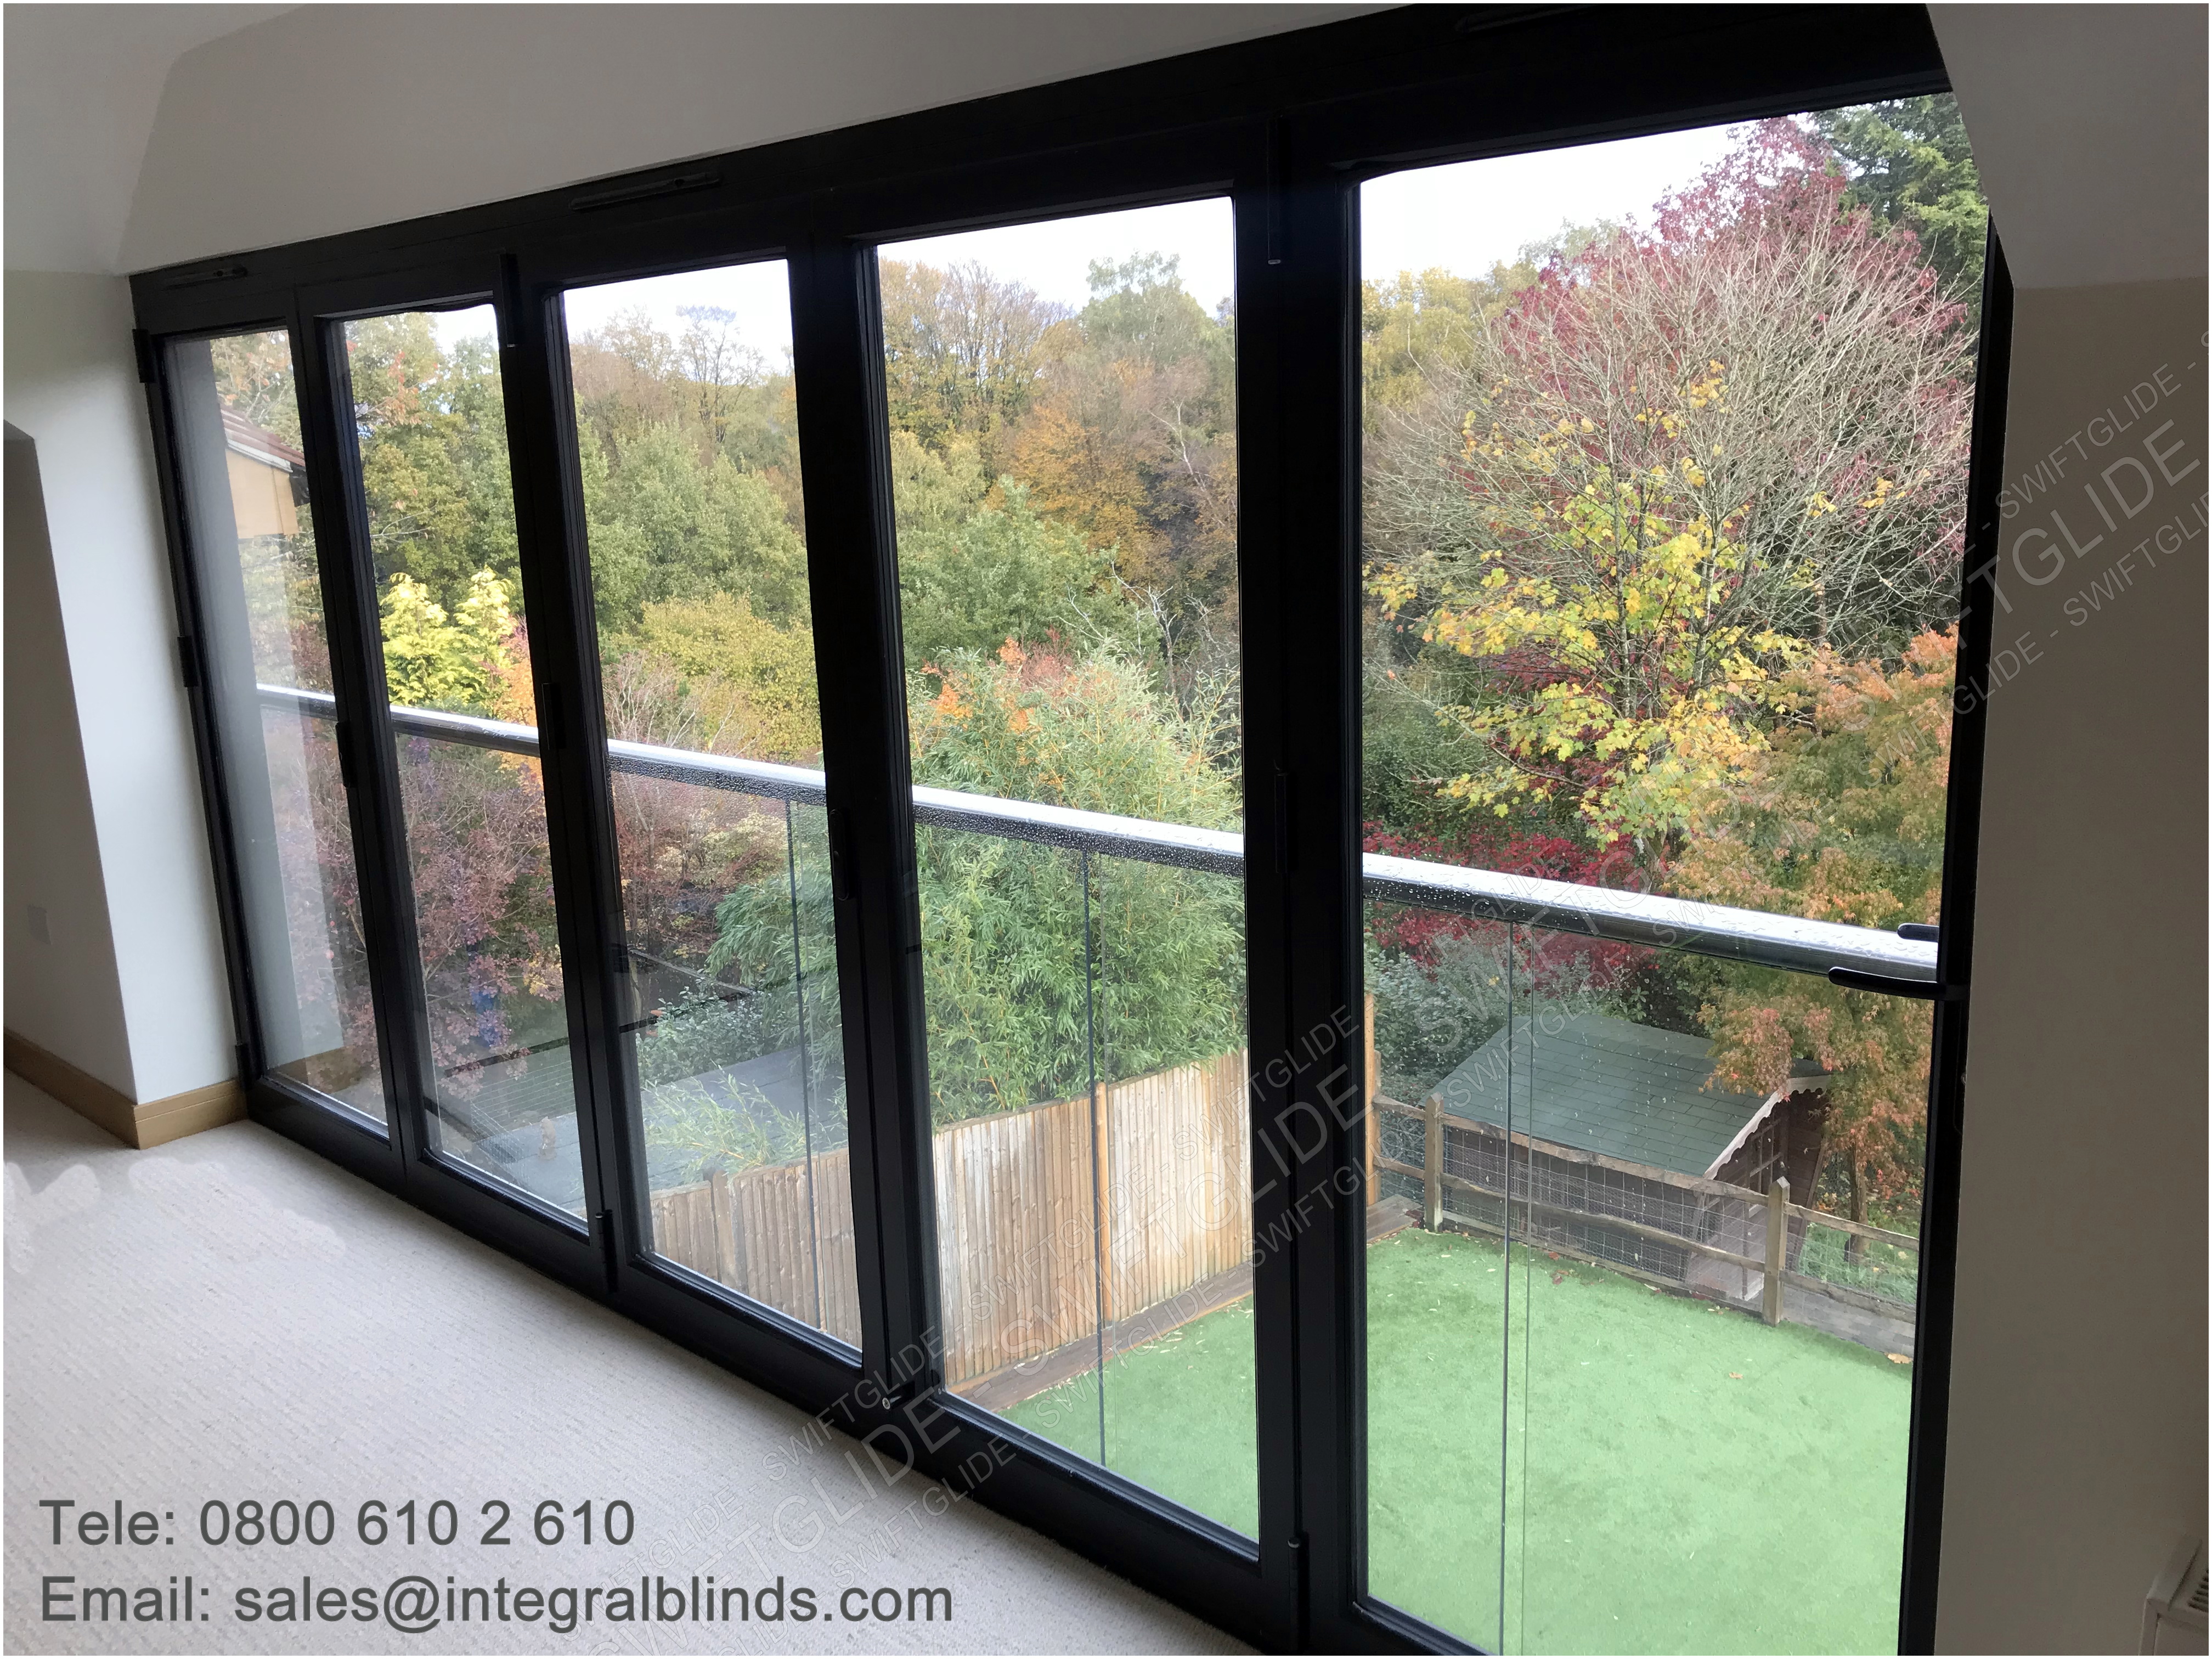 Before installation of Swiftglide magnet operated integral blind into this aluminium bifold door in Ashurst wood nr Godstone in Kent.